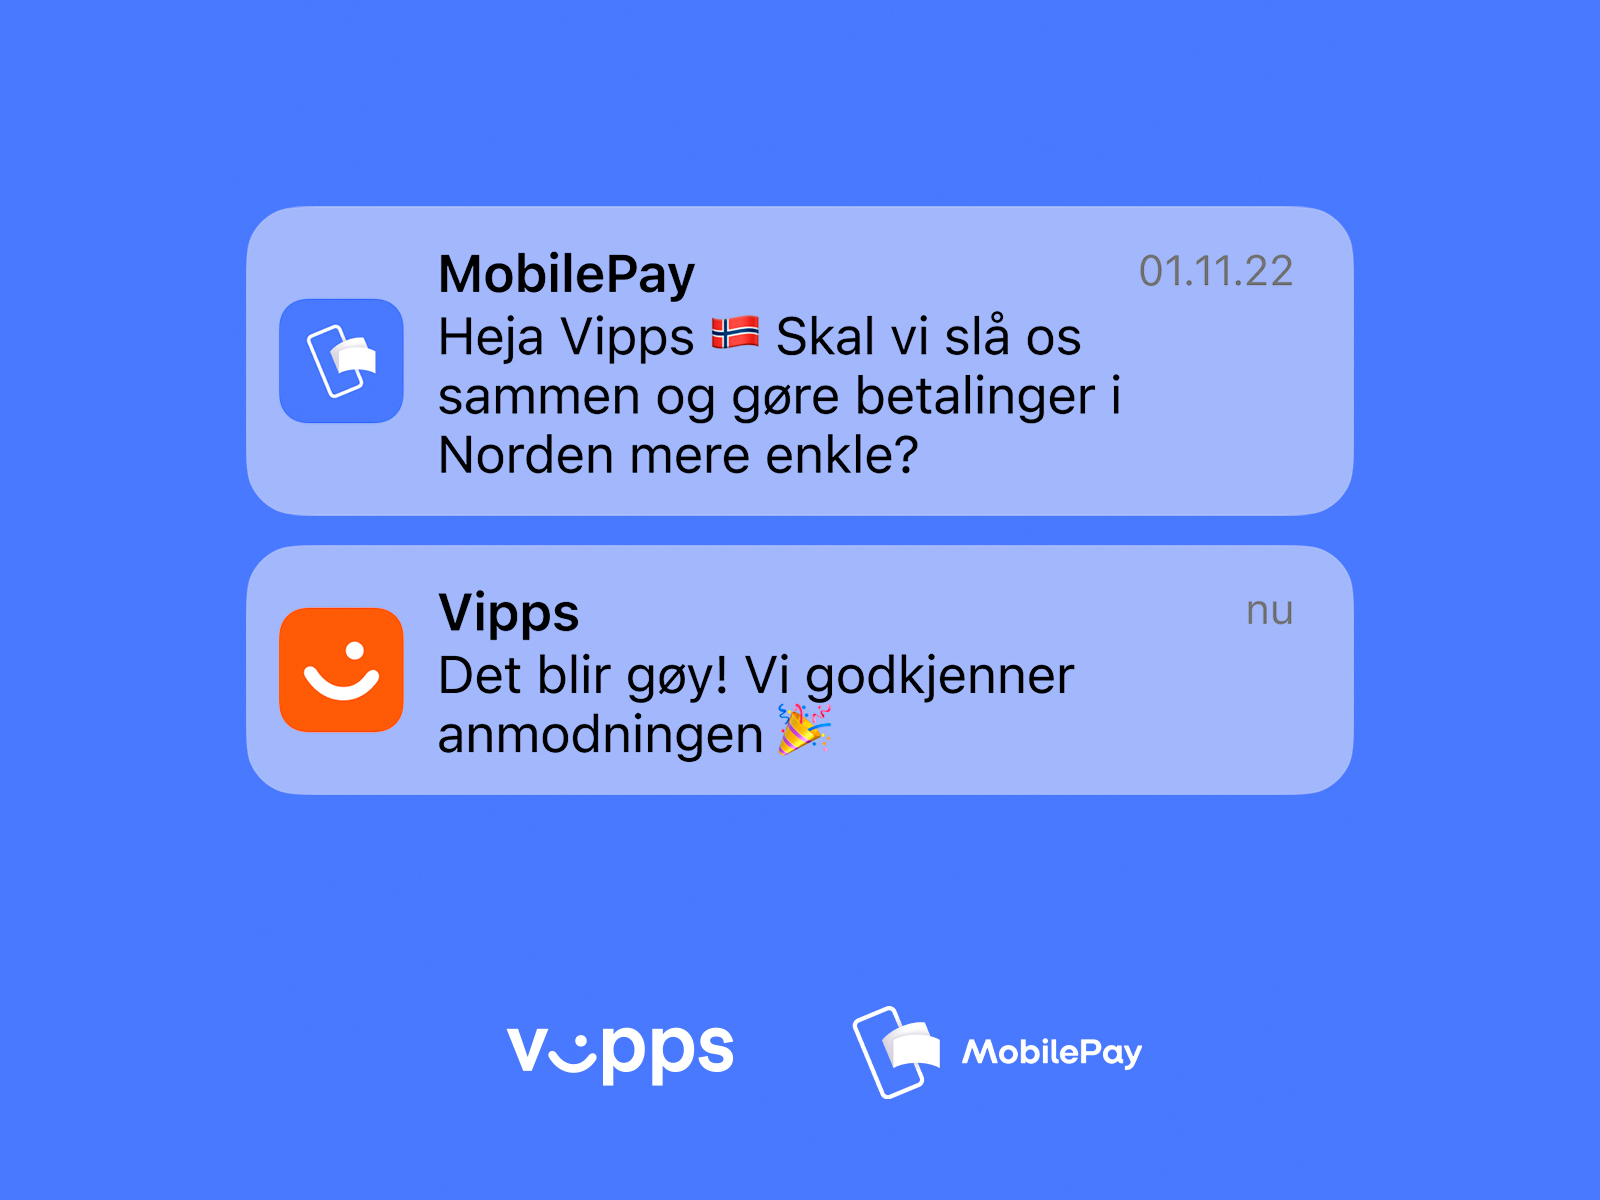 Image showing a push notification-conversation between Vipps and MobilePay.